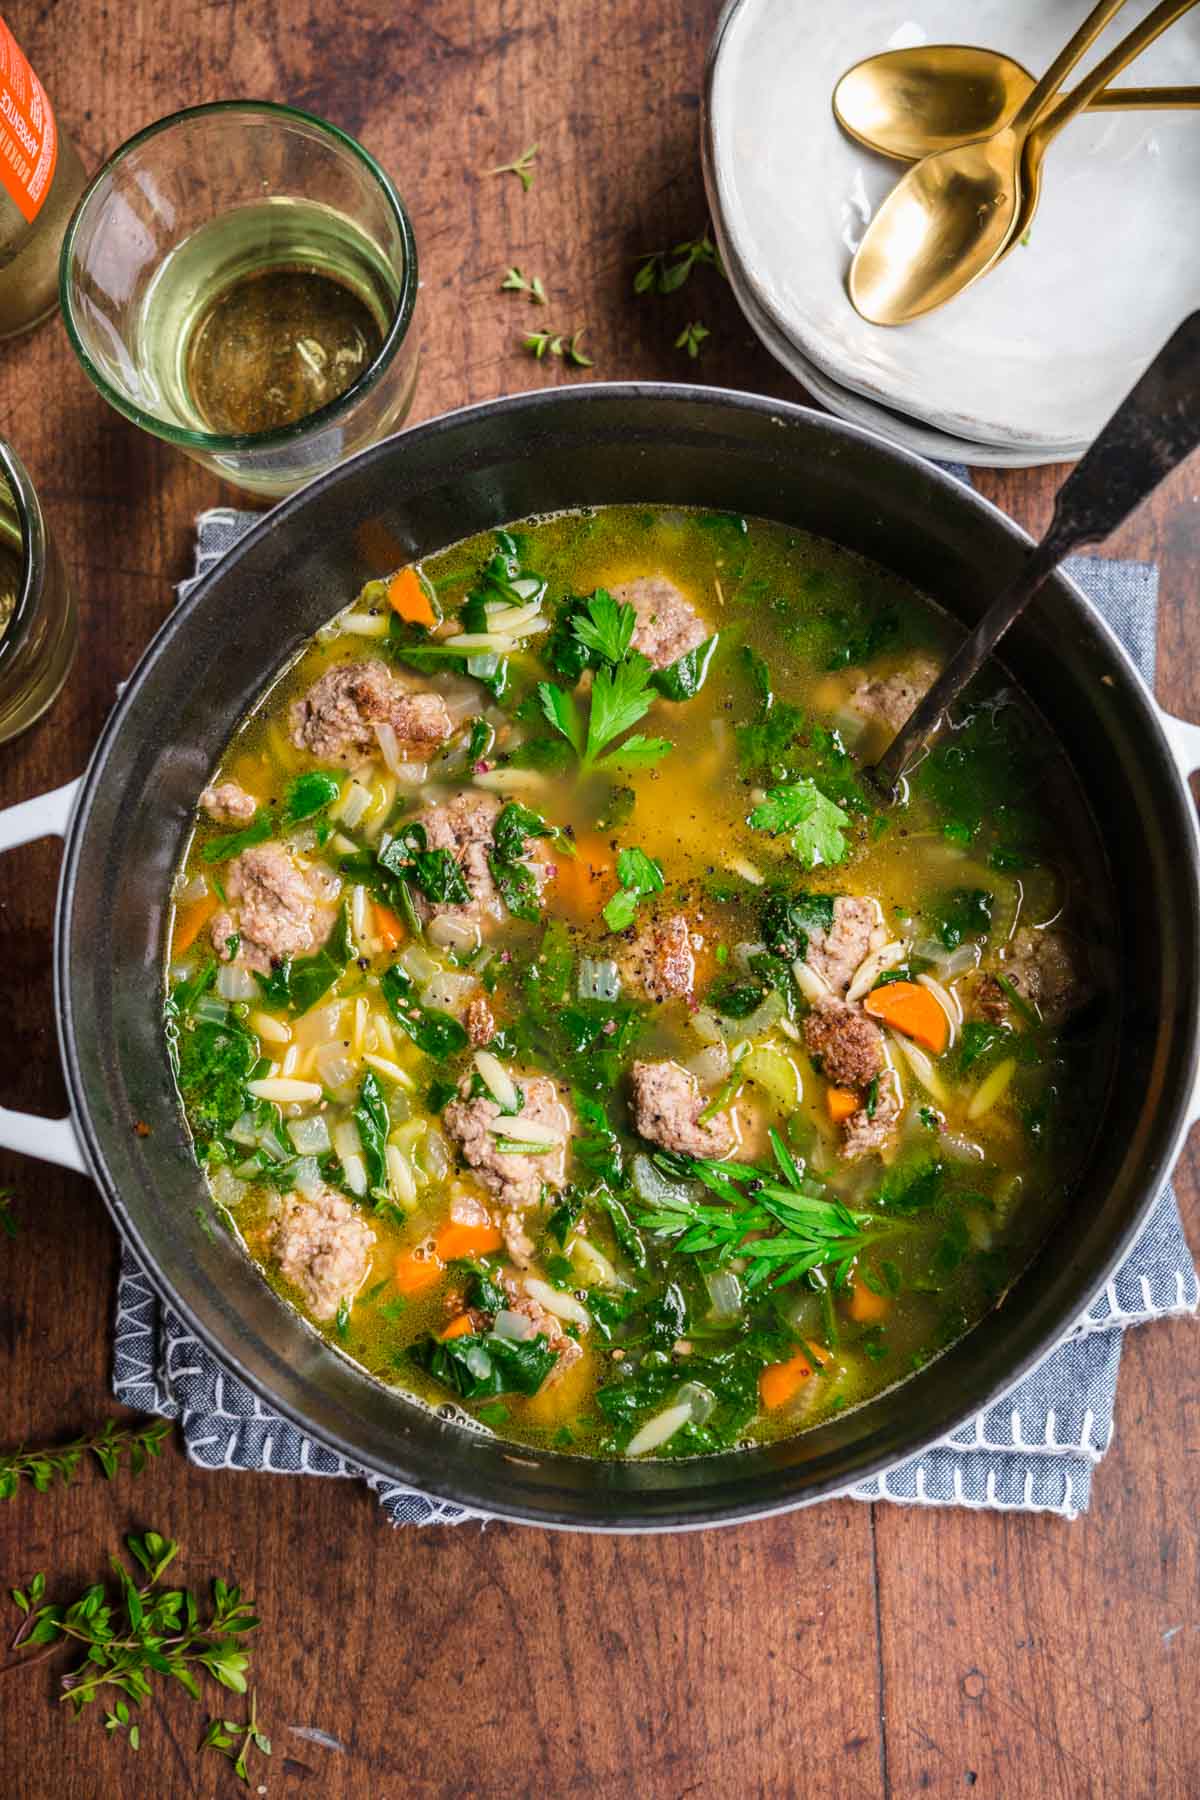 Italian Wedding Soup in pot with spoon and parsley garnish